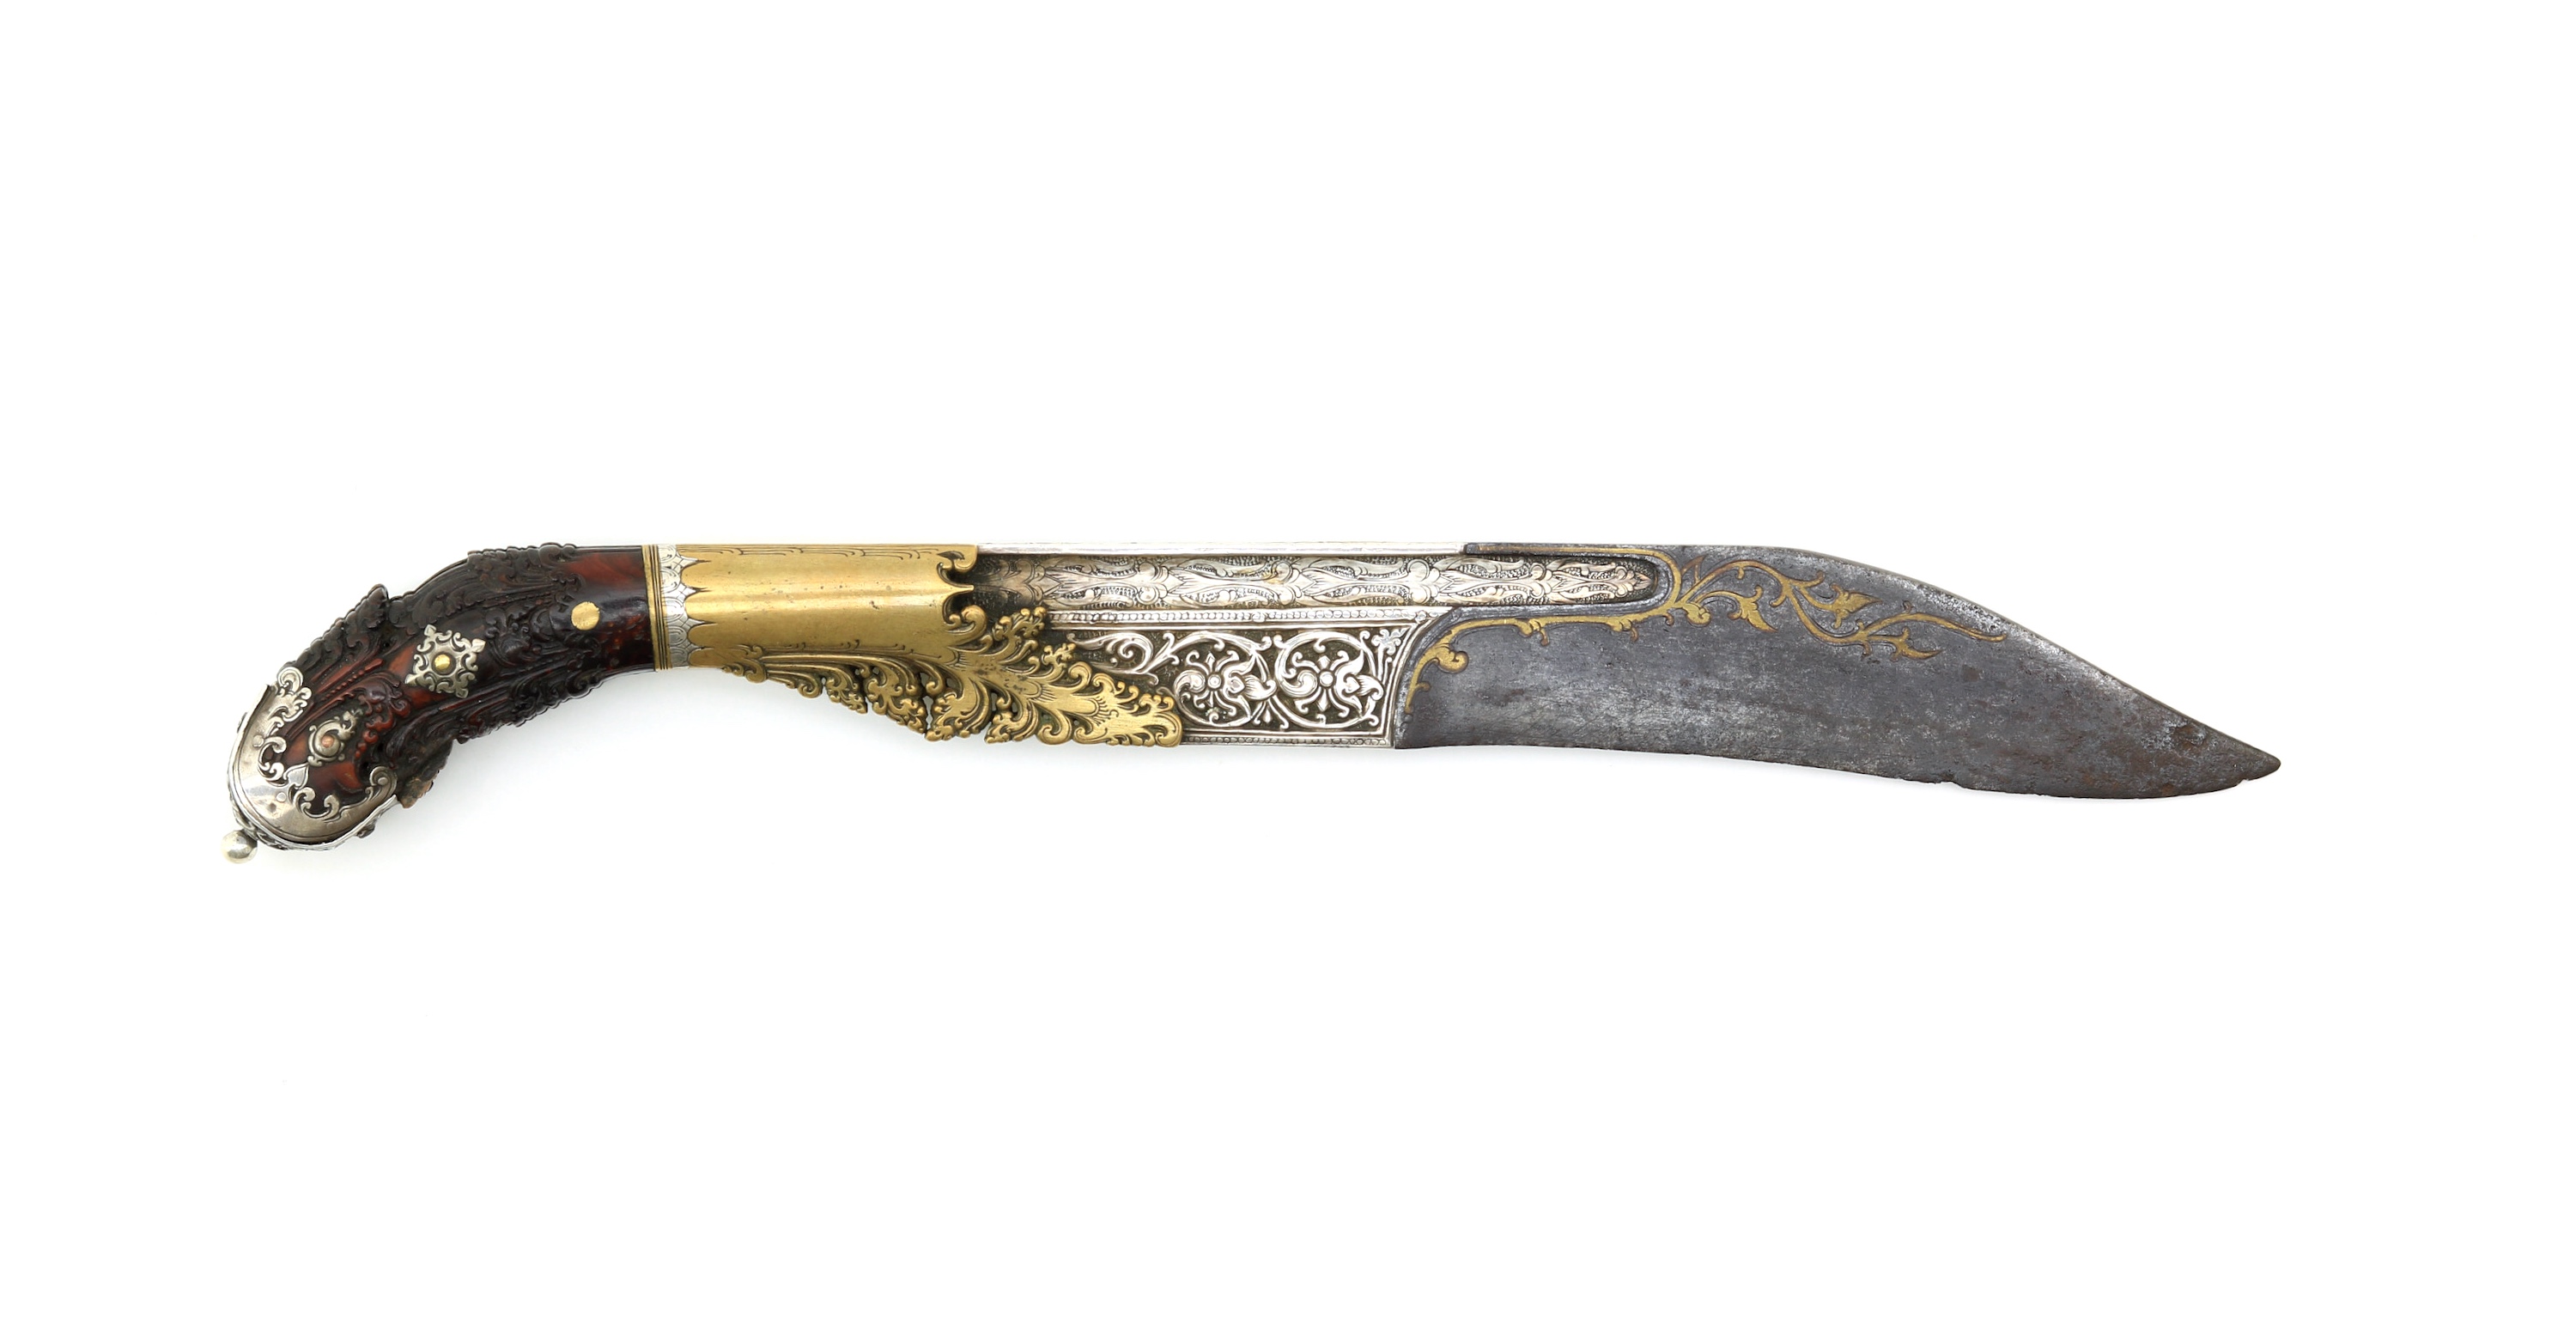 Sinhalese coral hilted knife